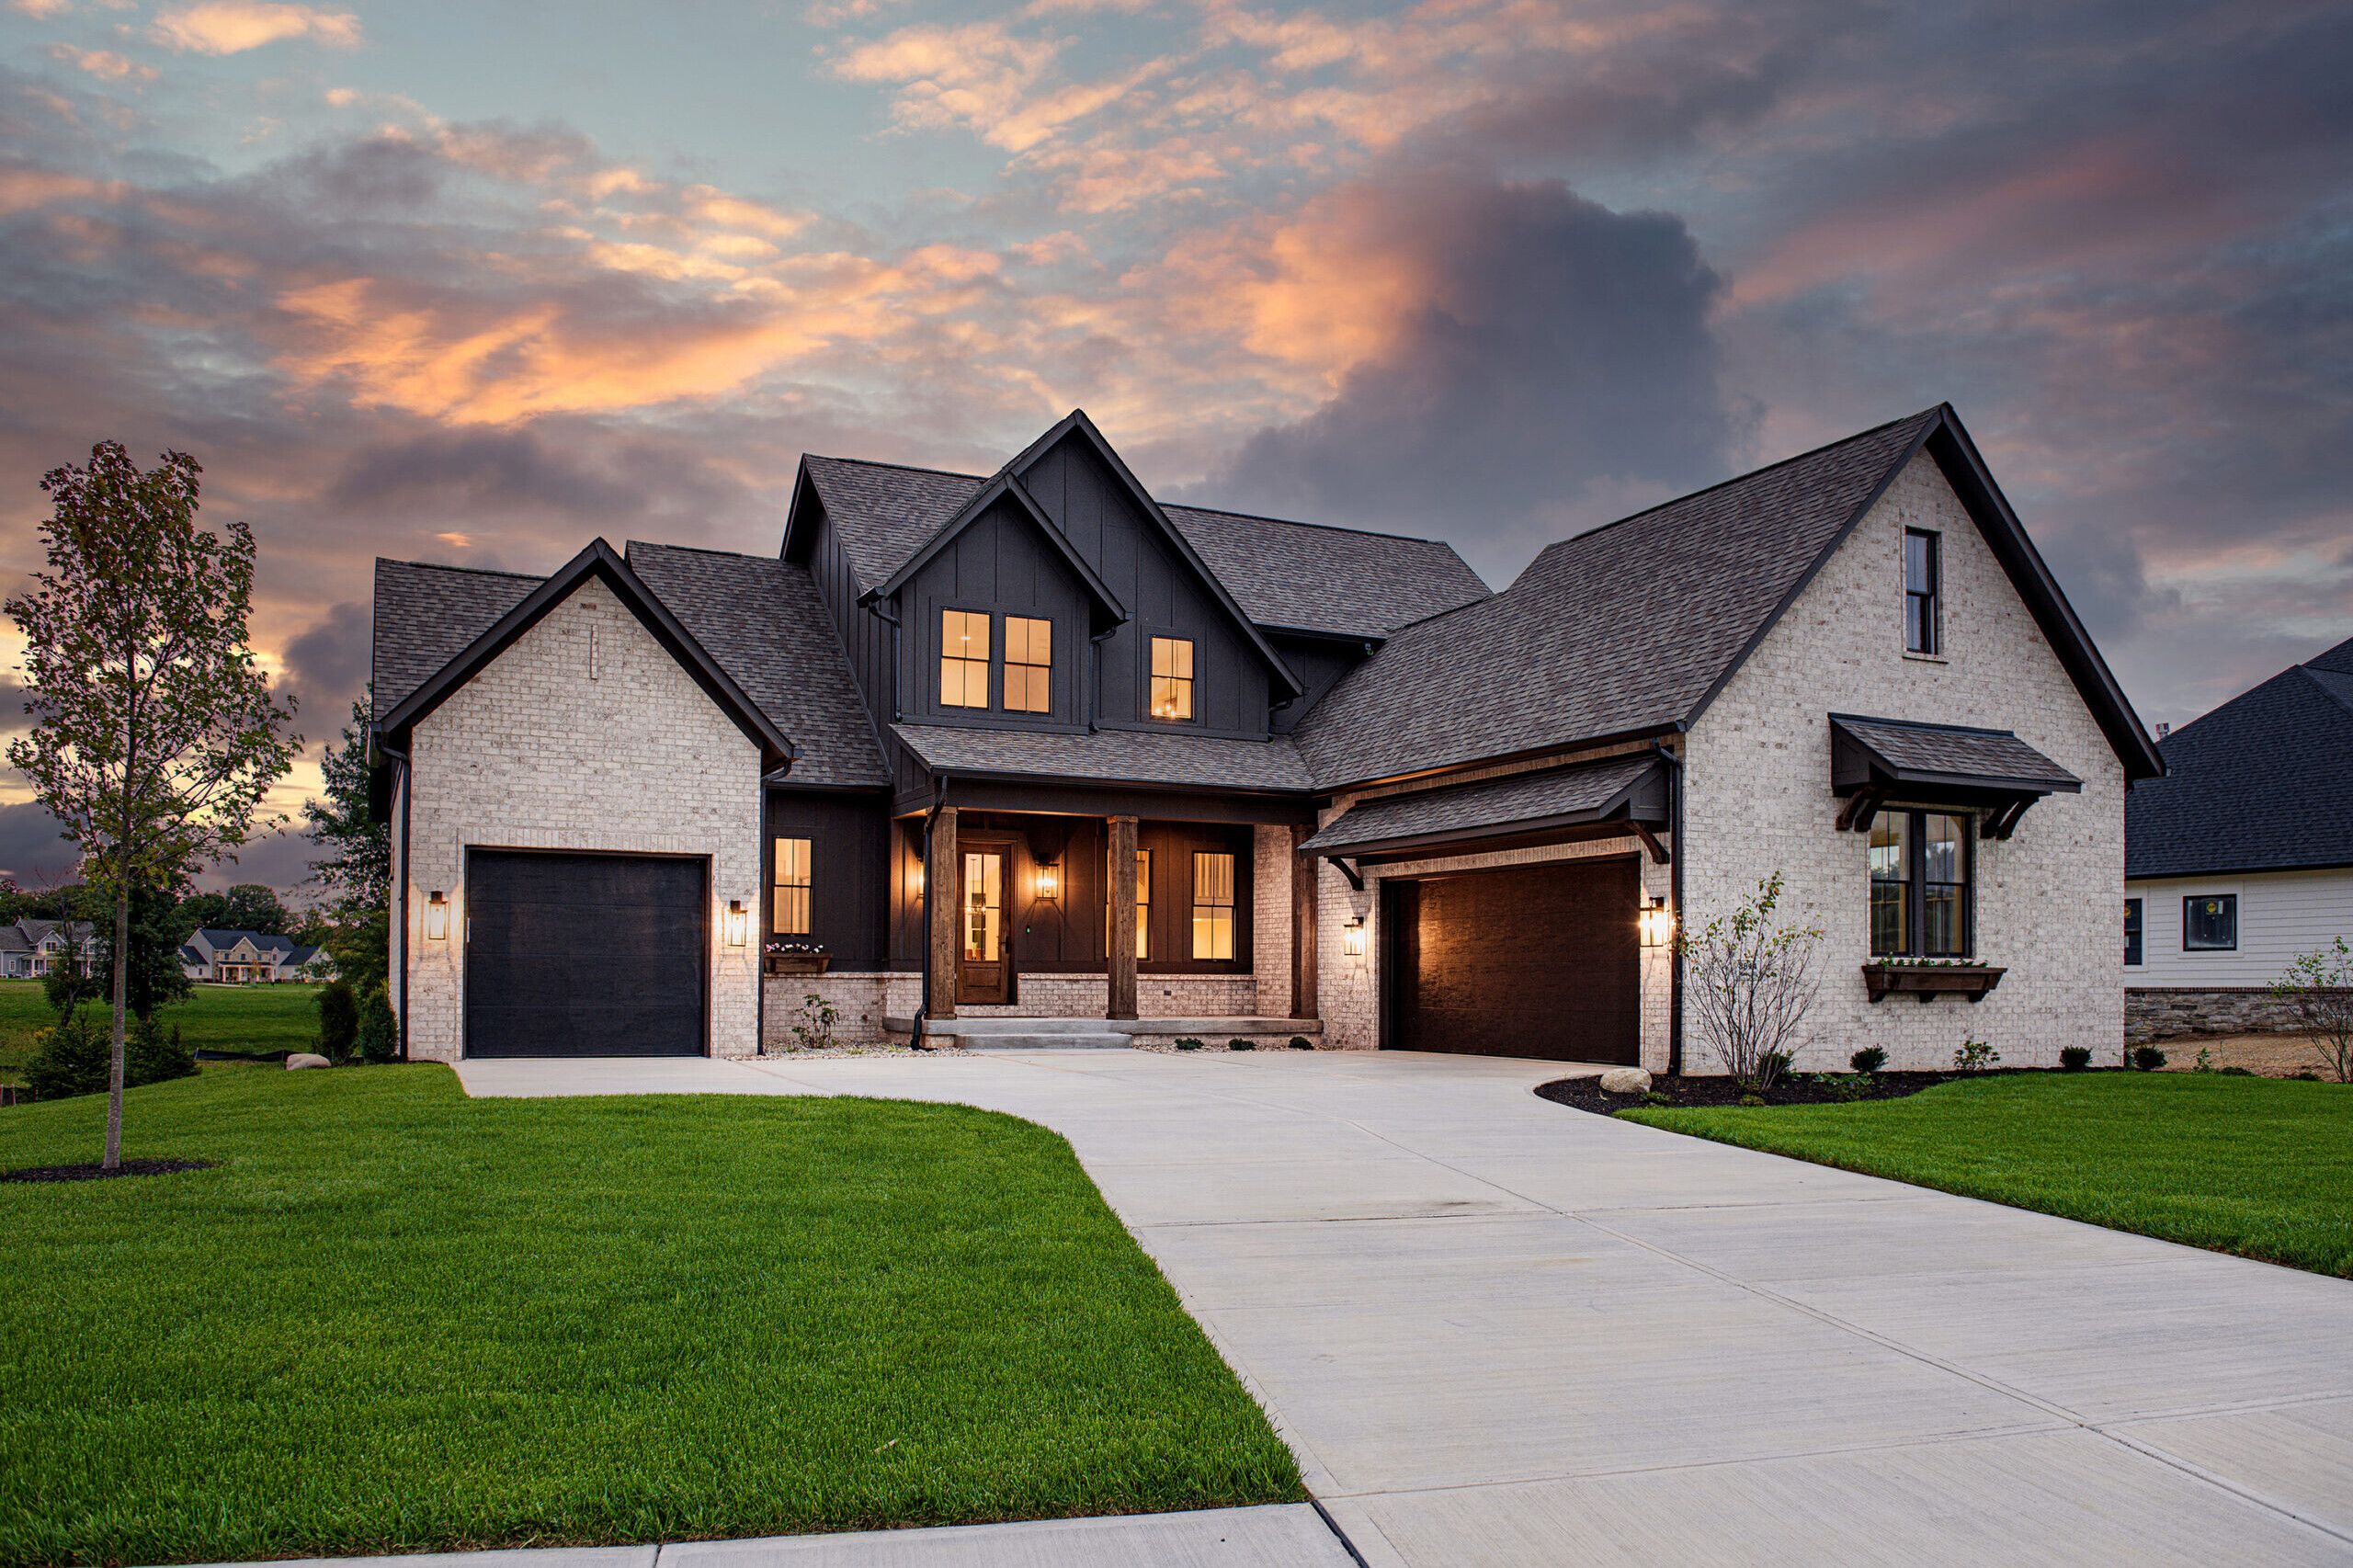 A custom home with a driveway and garage at dusk in Carmel, Indiana, or Fishers, Indiana.